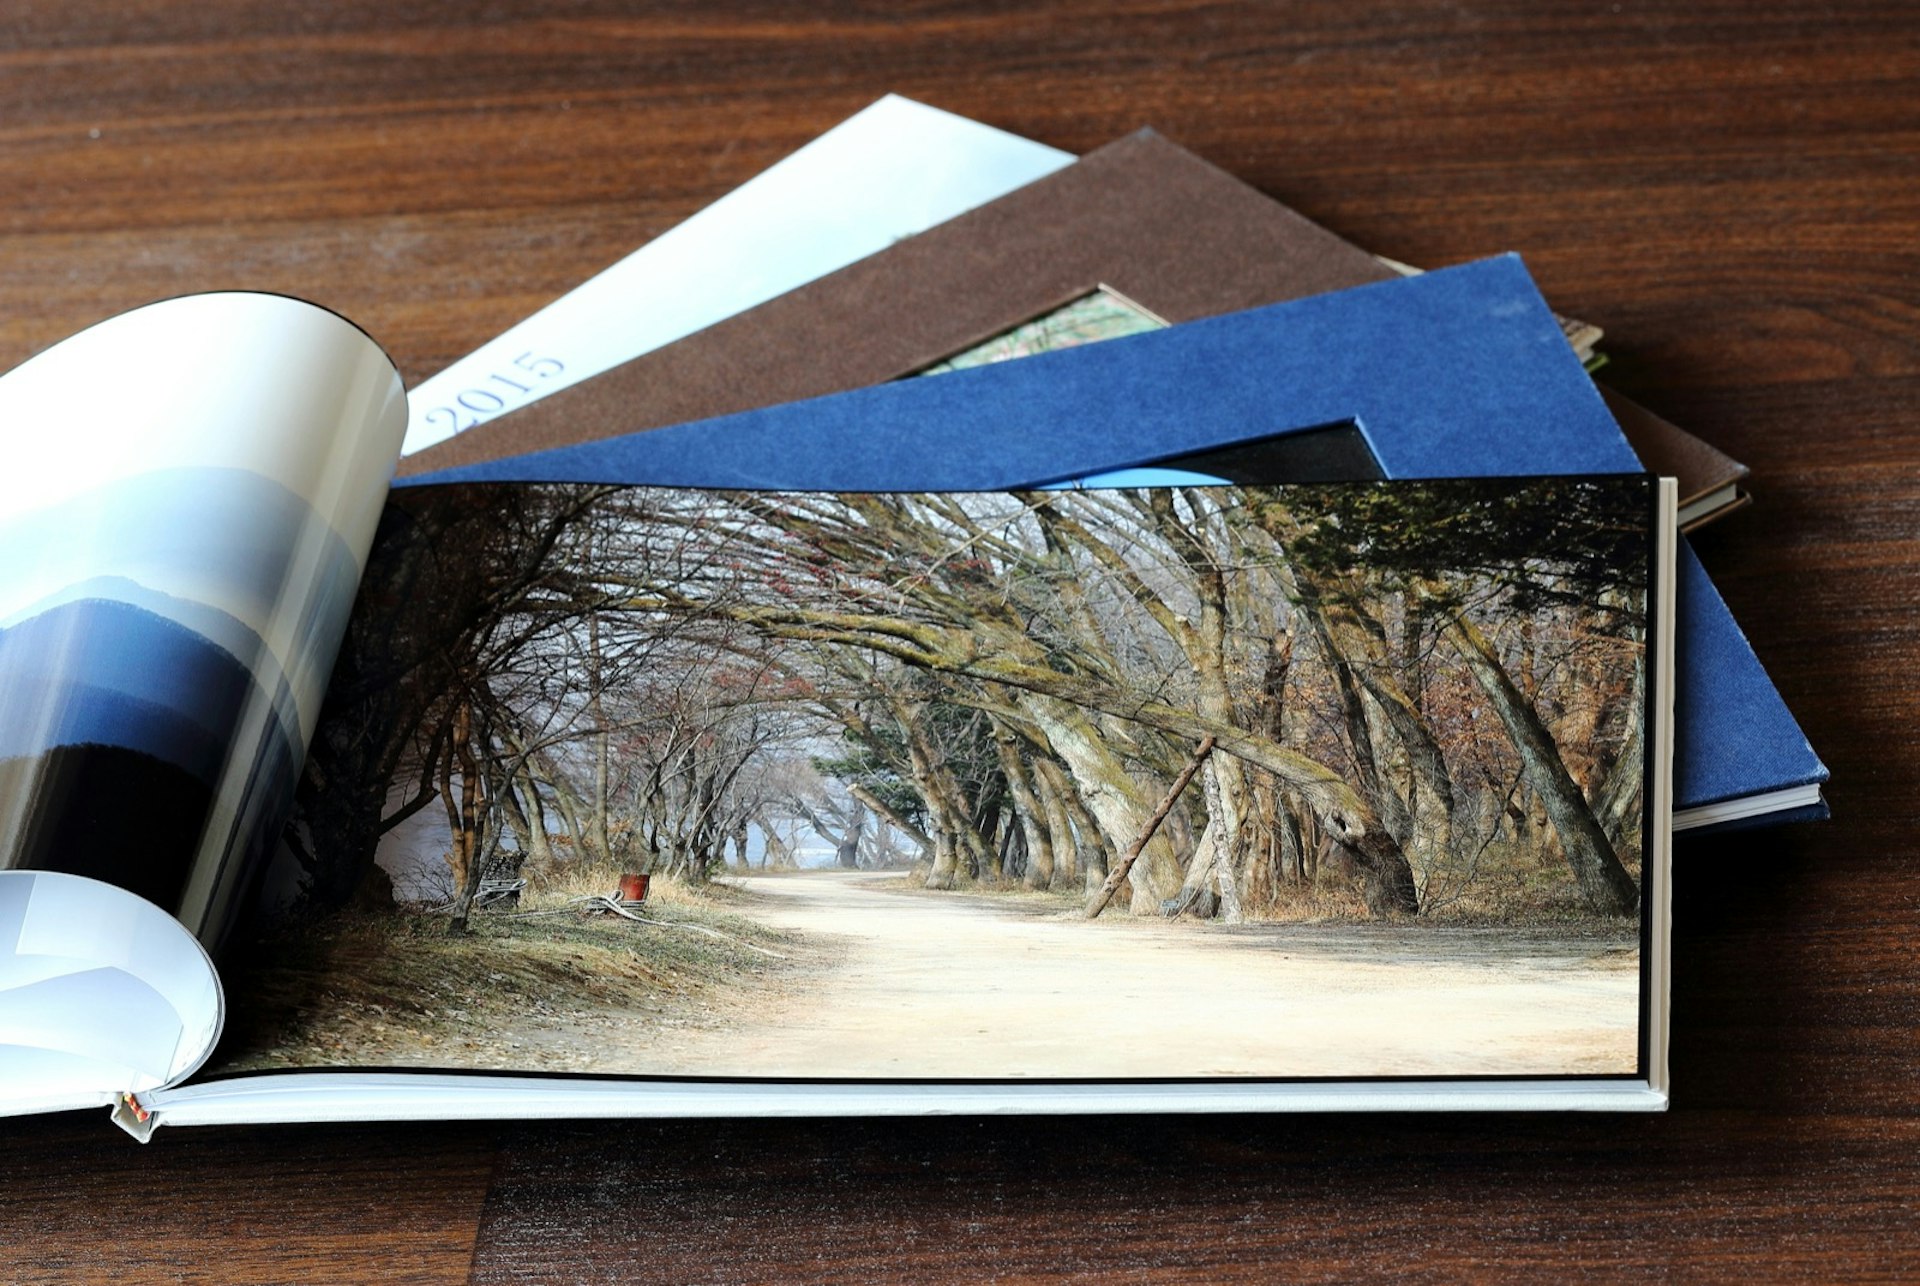 A stack of photo books and the top one is opened to a two-page spread of a live oak alley with a path running under the trees.